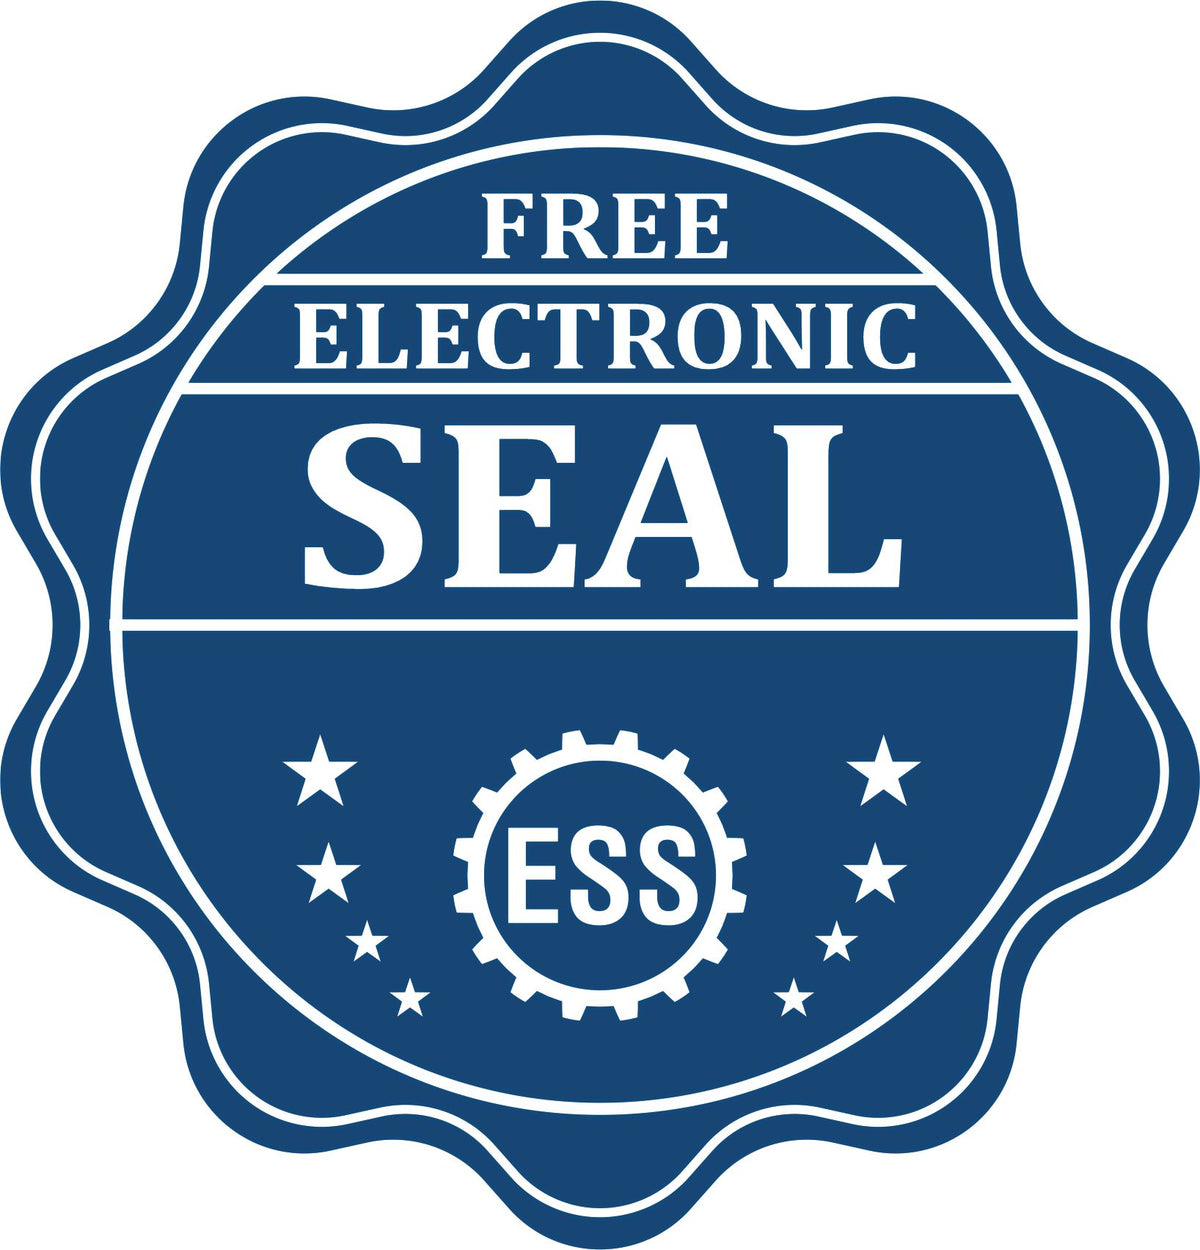 A badge showing a free electronic seal for the Gift New Mexico Land Surveyor Seal with stars and the ESS gear on the emblem.